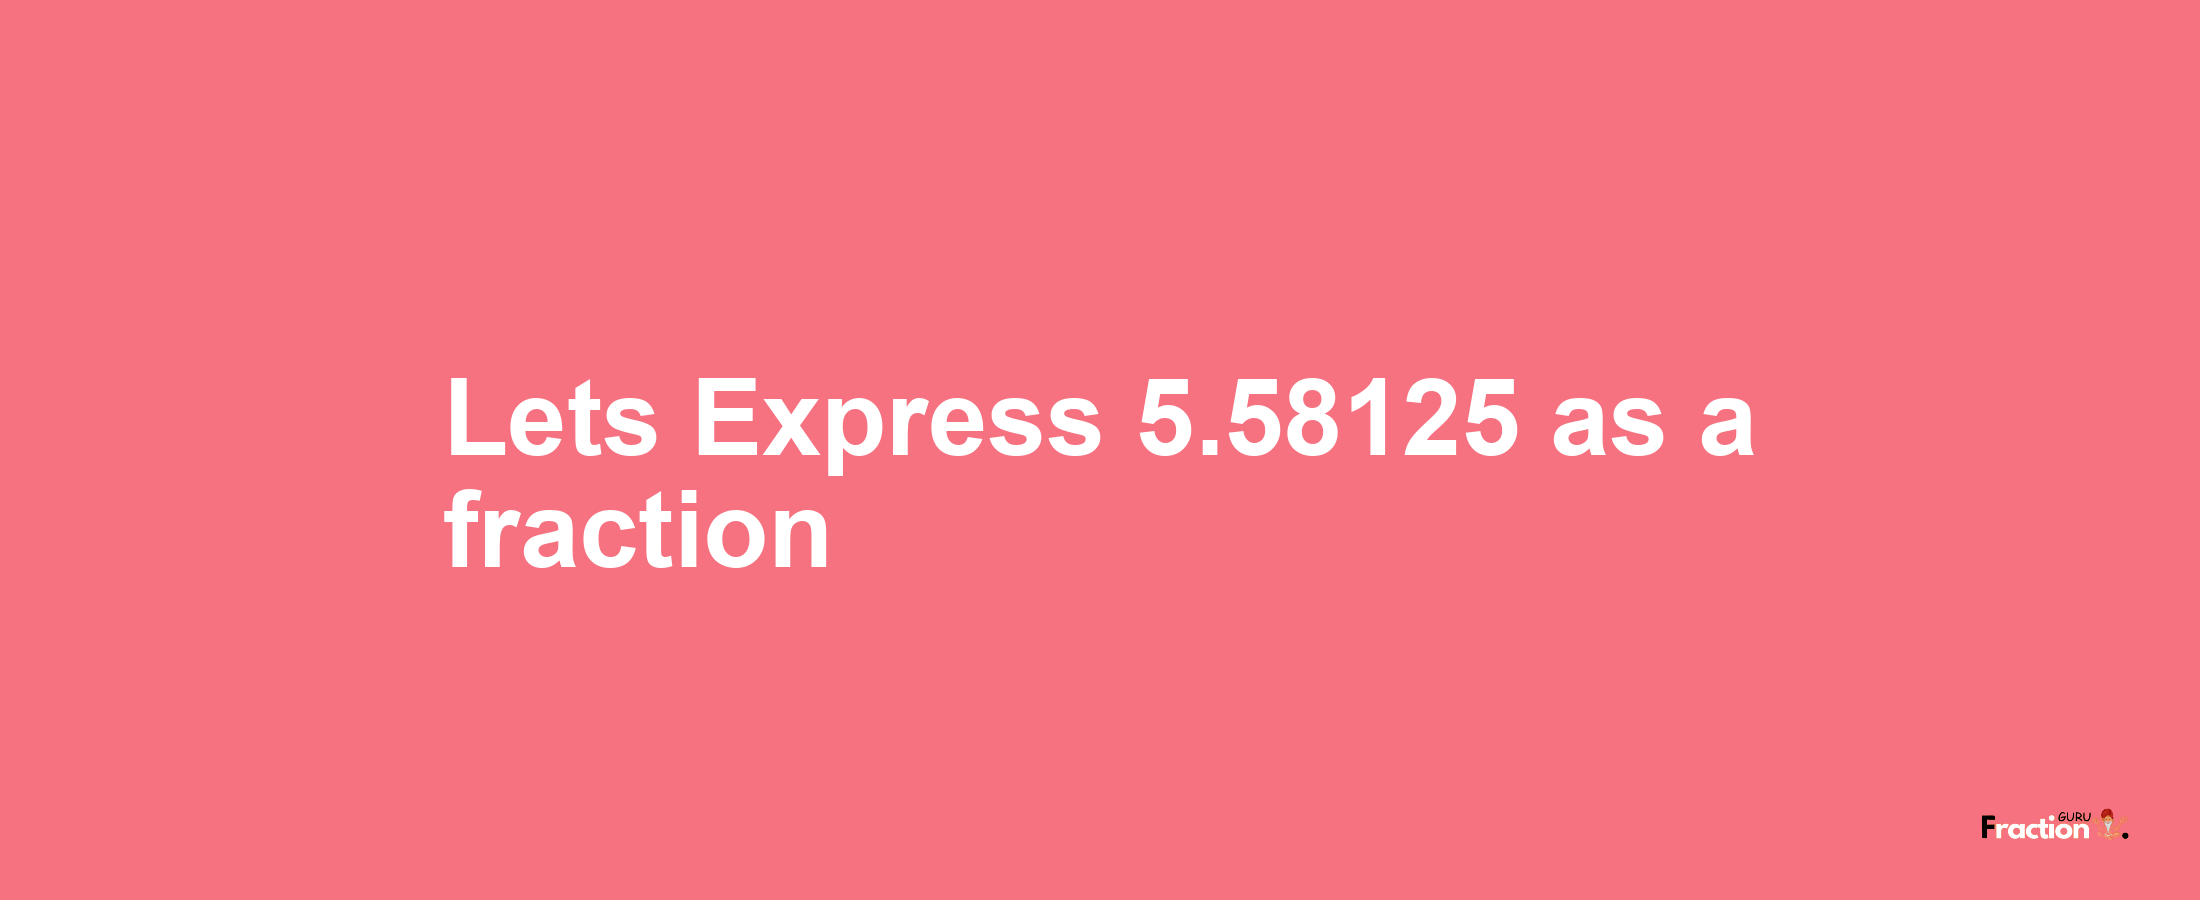 Lets Express 5.58125 as afraction